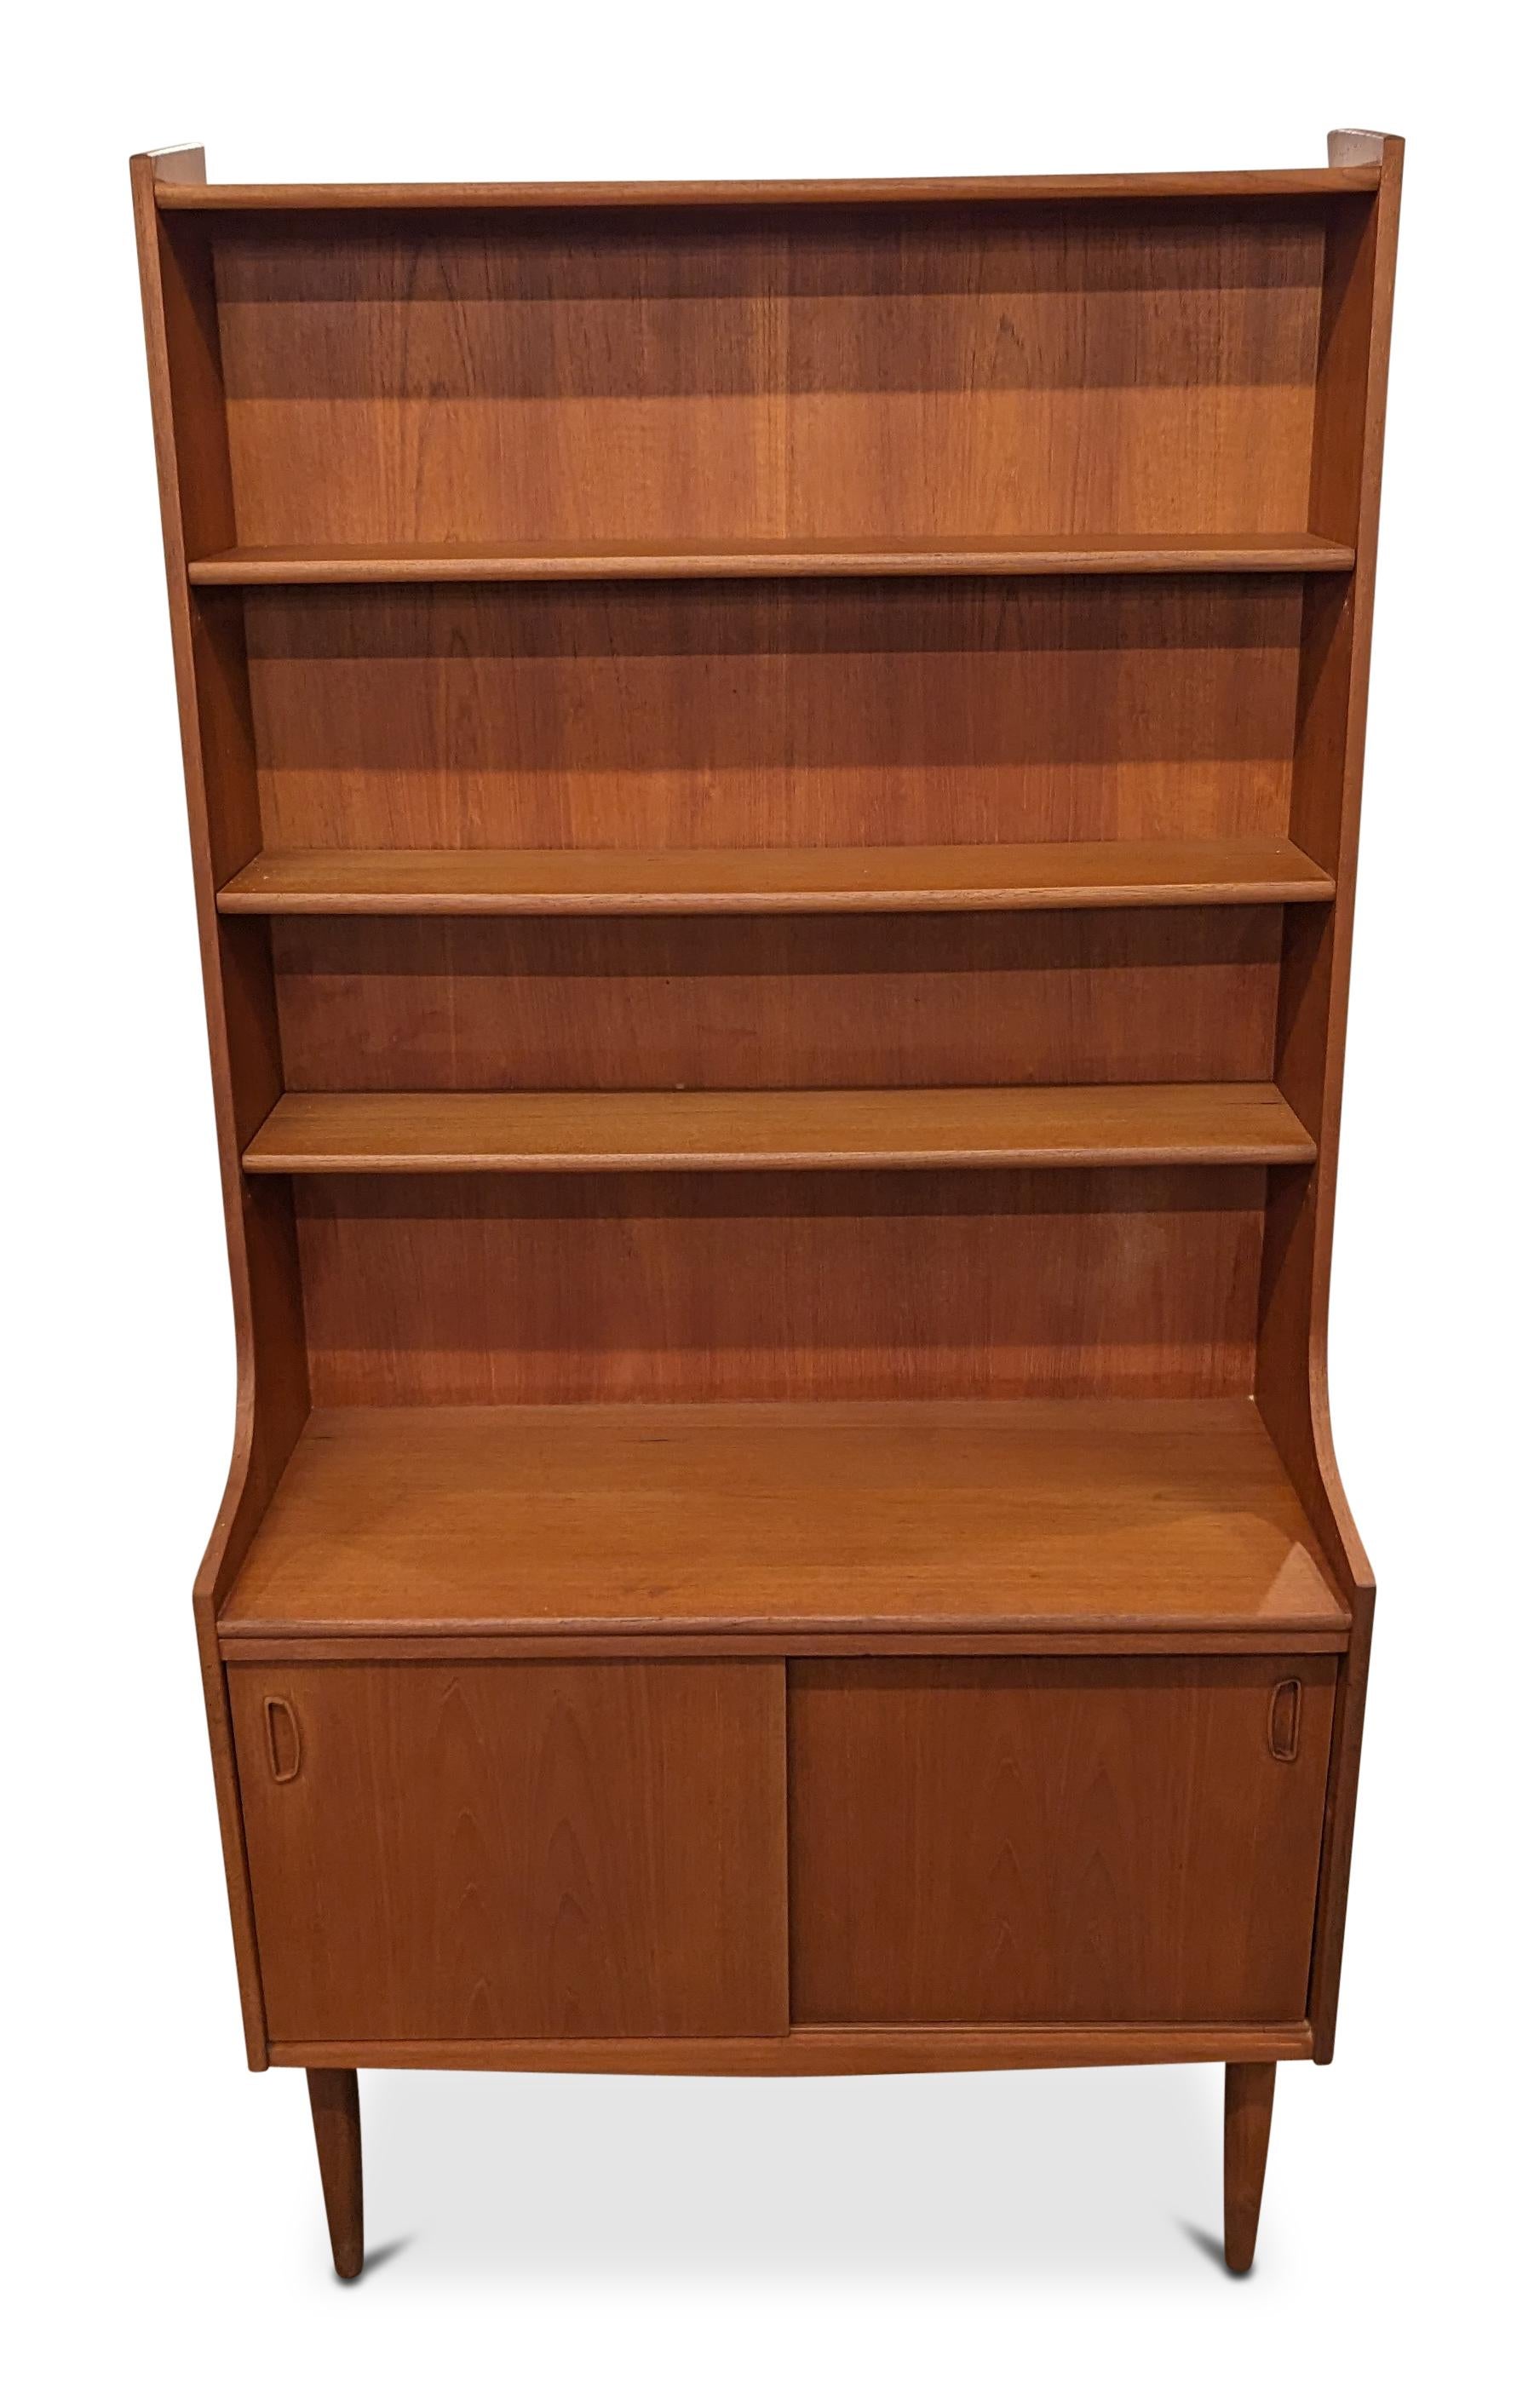 Vintage Danish Mid Century Teak Bookcase - 022411 In Good Condition For Sale In Brooklyn, NY